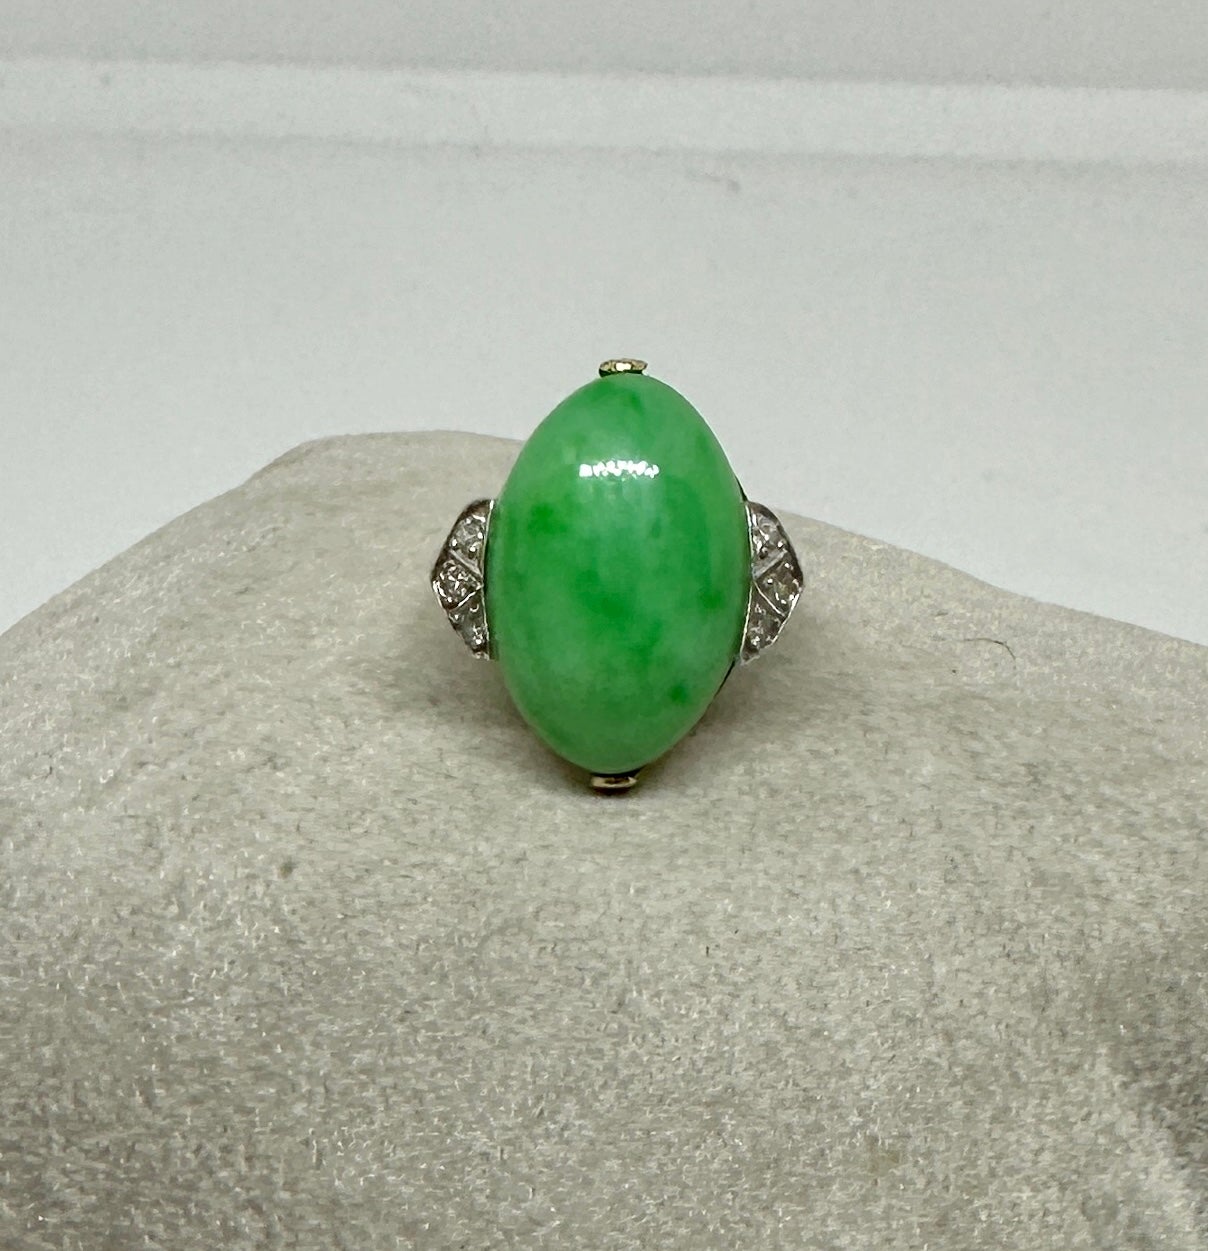 This is a stunning antique Art Deco Jade, Diamond and Platinum atop 14 Karat Yellow Gold Ring.  The Wedding Ring, Engagement Ring or Cocktail Ring with a superb natural oval Jade Cabochon of great beauty is accented by 6 sparkling White Diamonds set